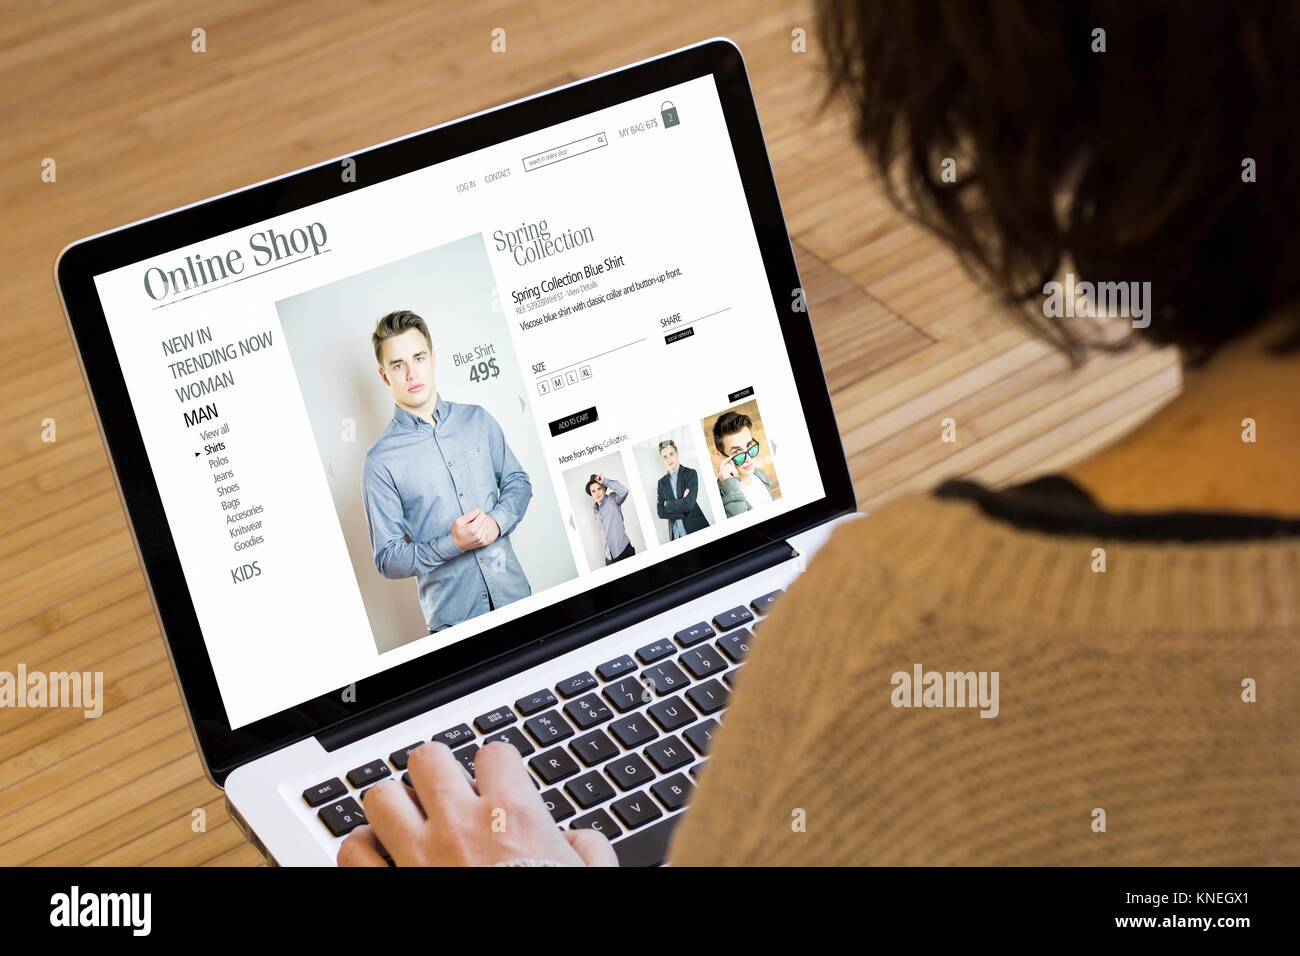 marketing online concept: online shop on a laptop screen. Screen graphics are made up. Stock Photo